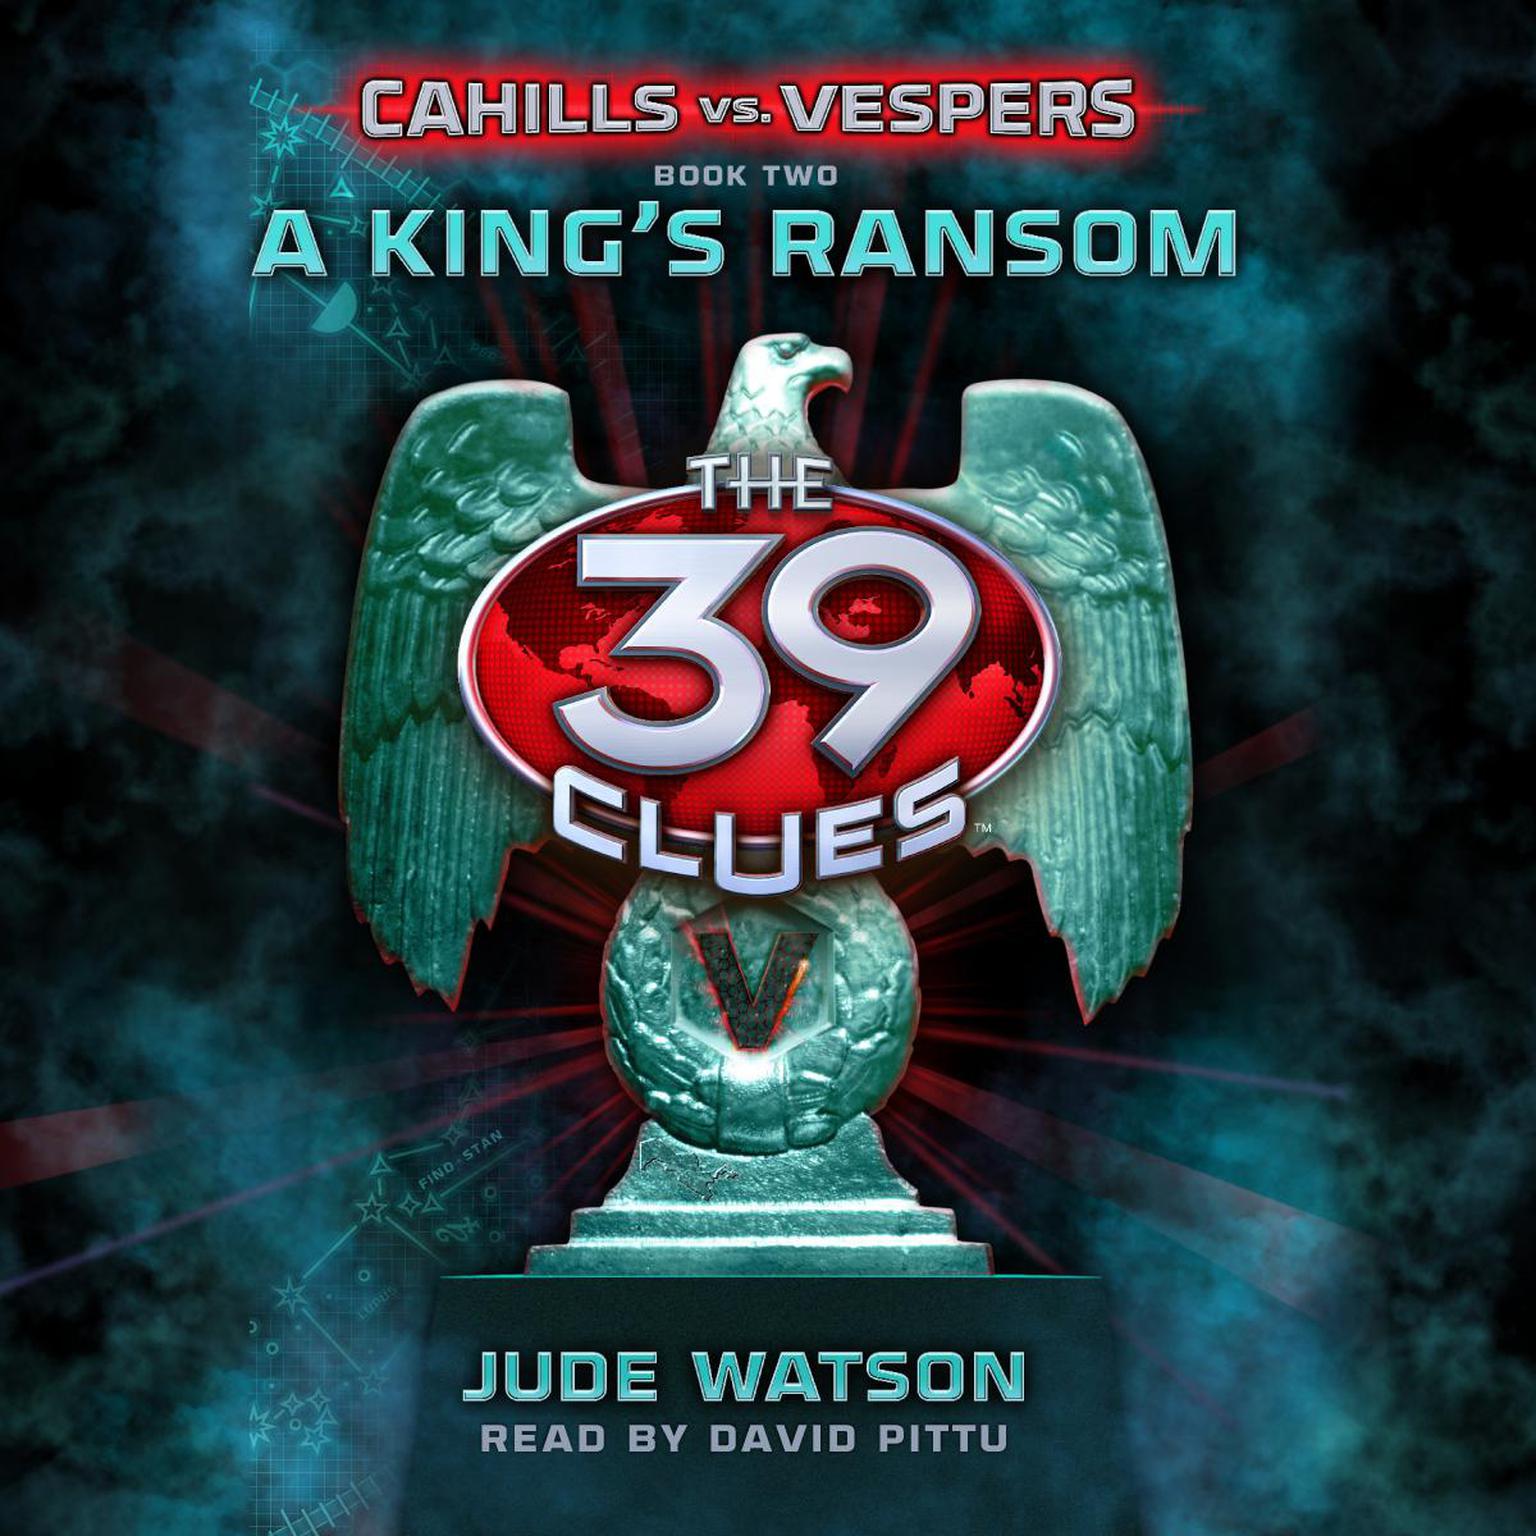 A King’s Ransom Audiobook, by Jude Watson